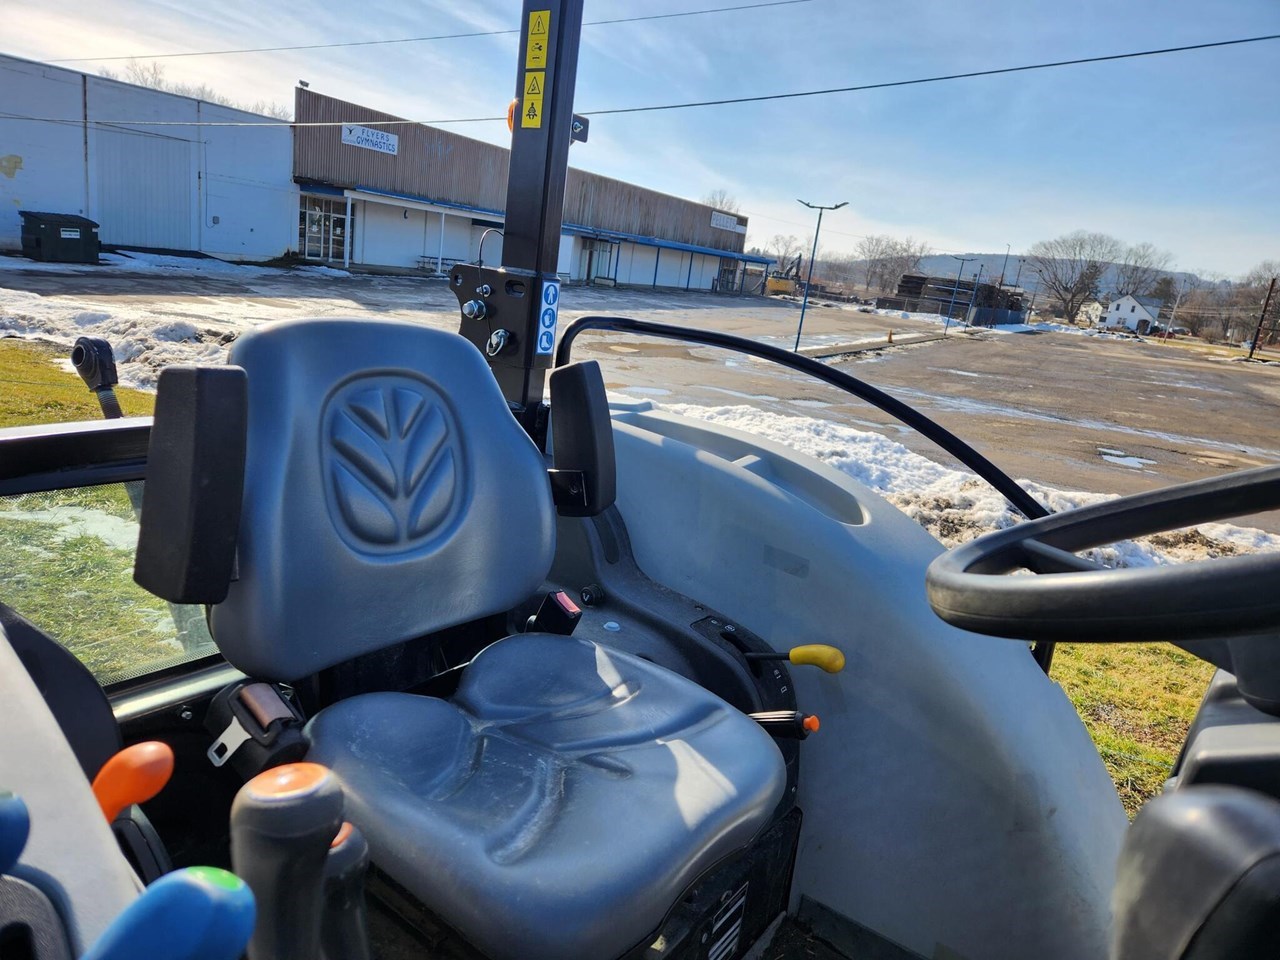 2019 New Holland Workmaster 75 Tractor - Utility For Sale